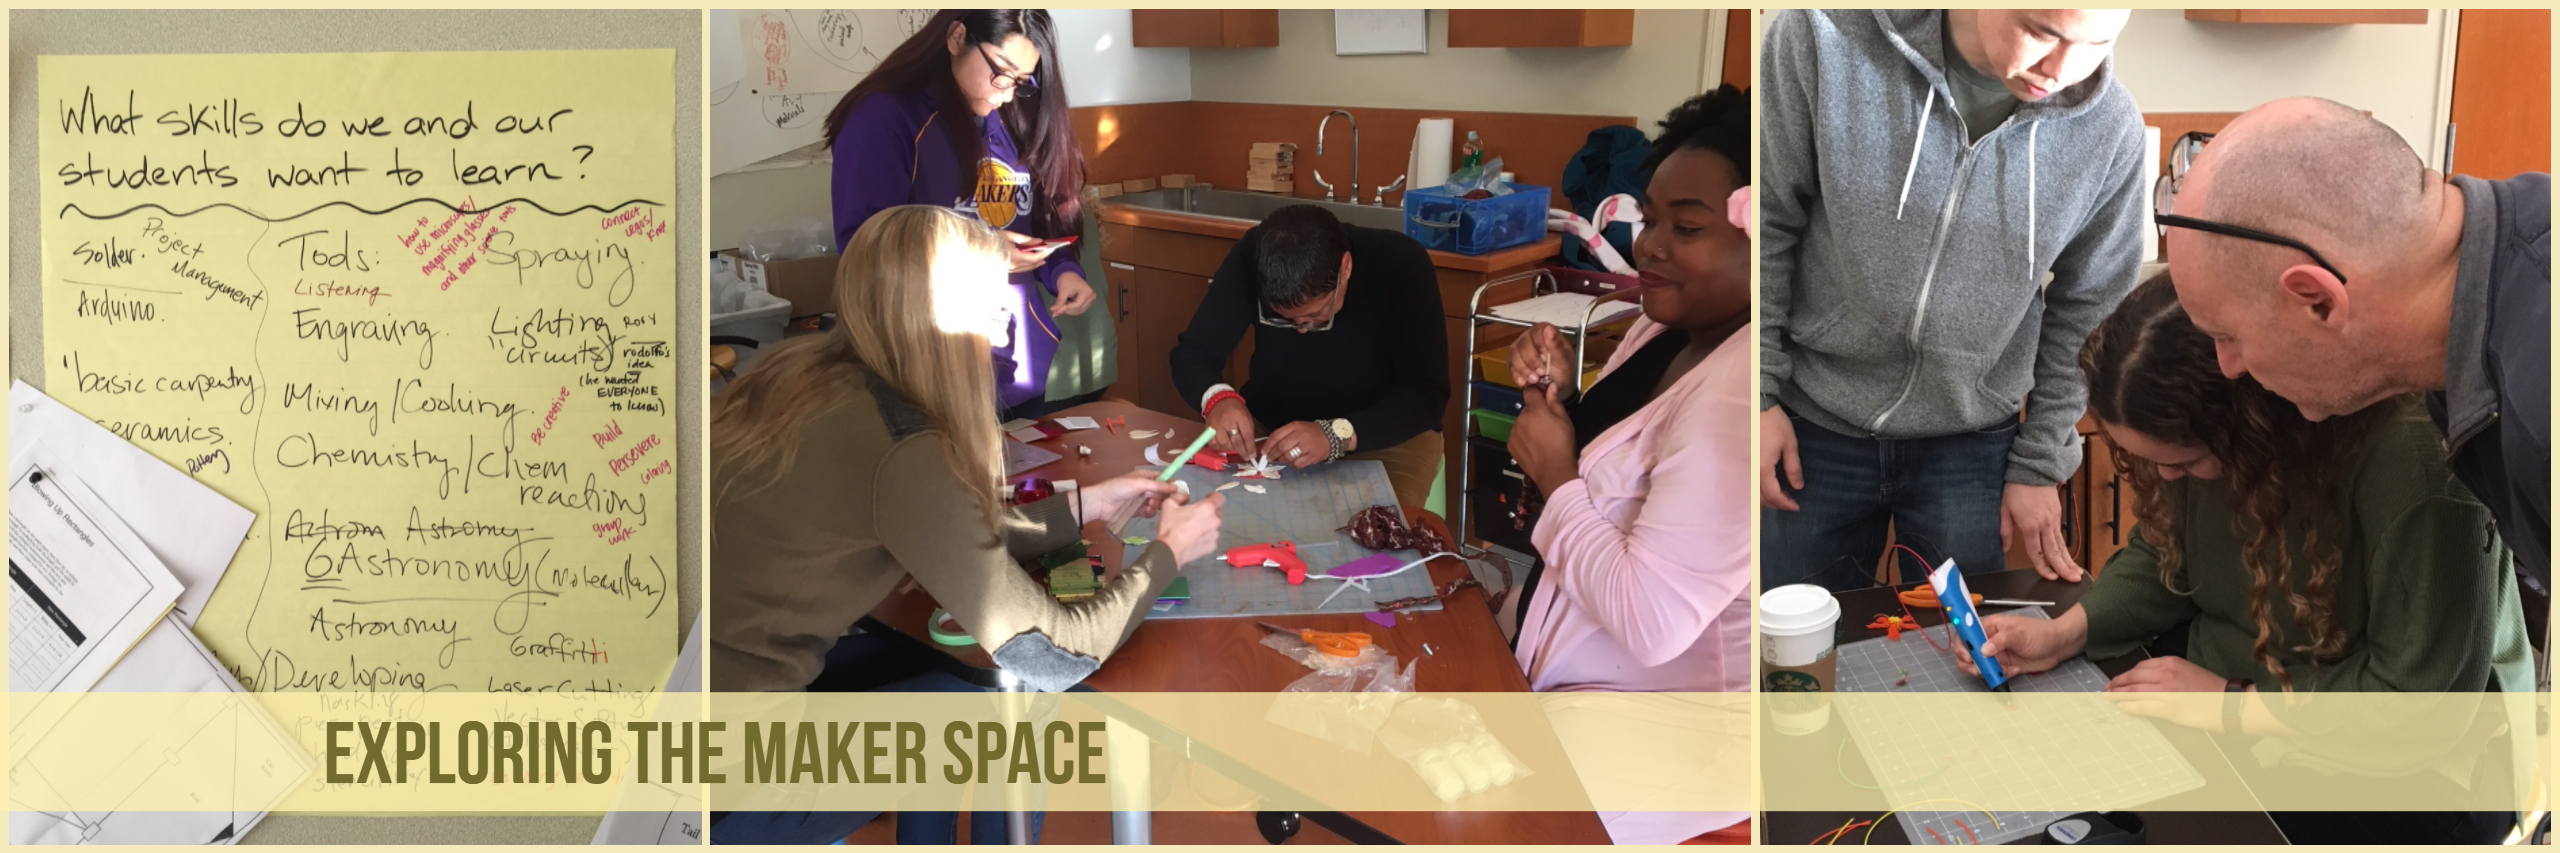 Exploring the Maker Space collage